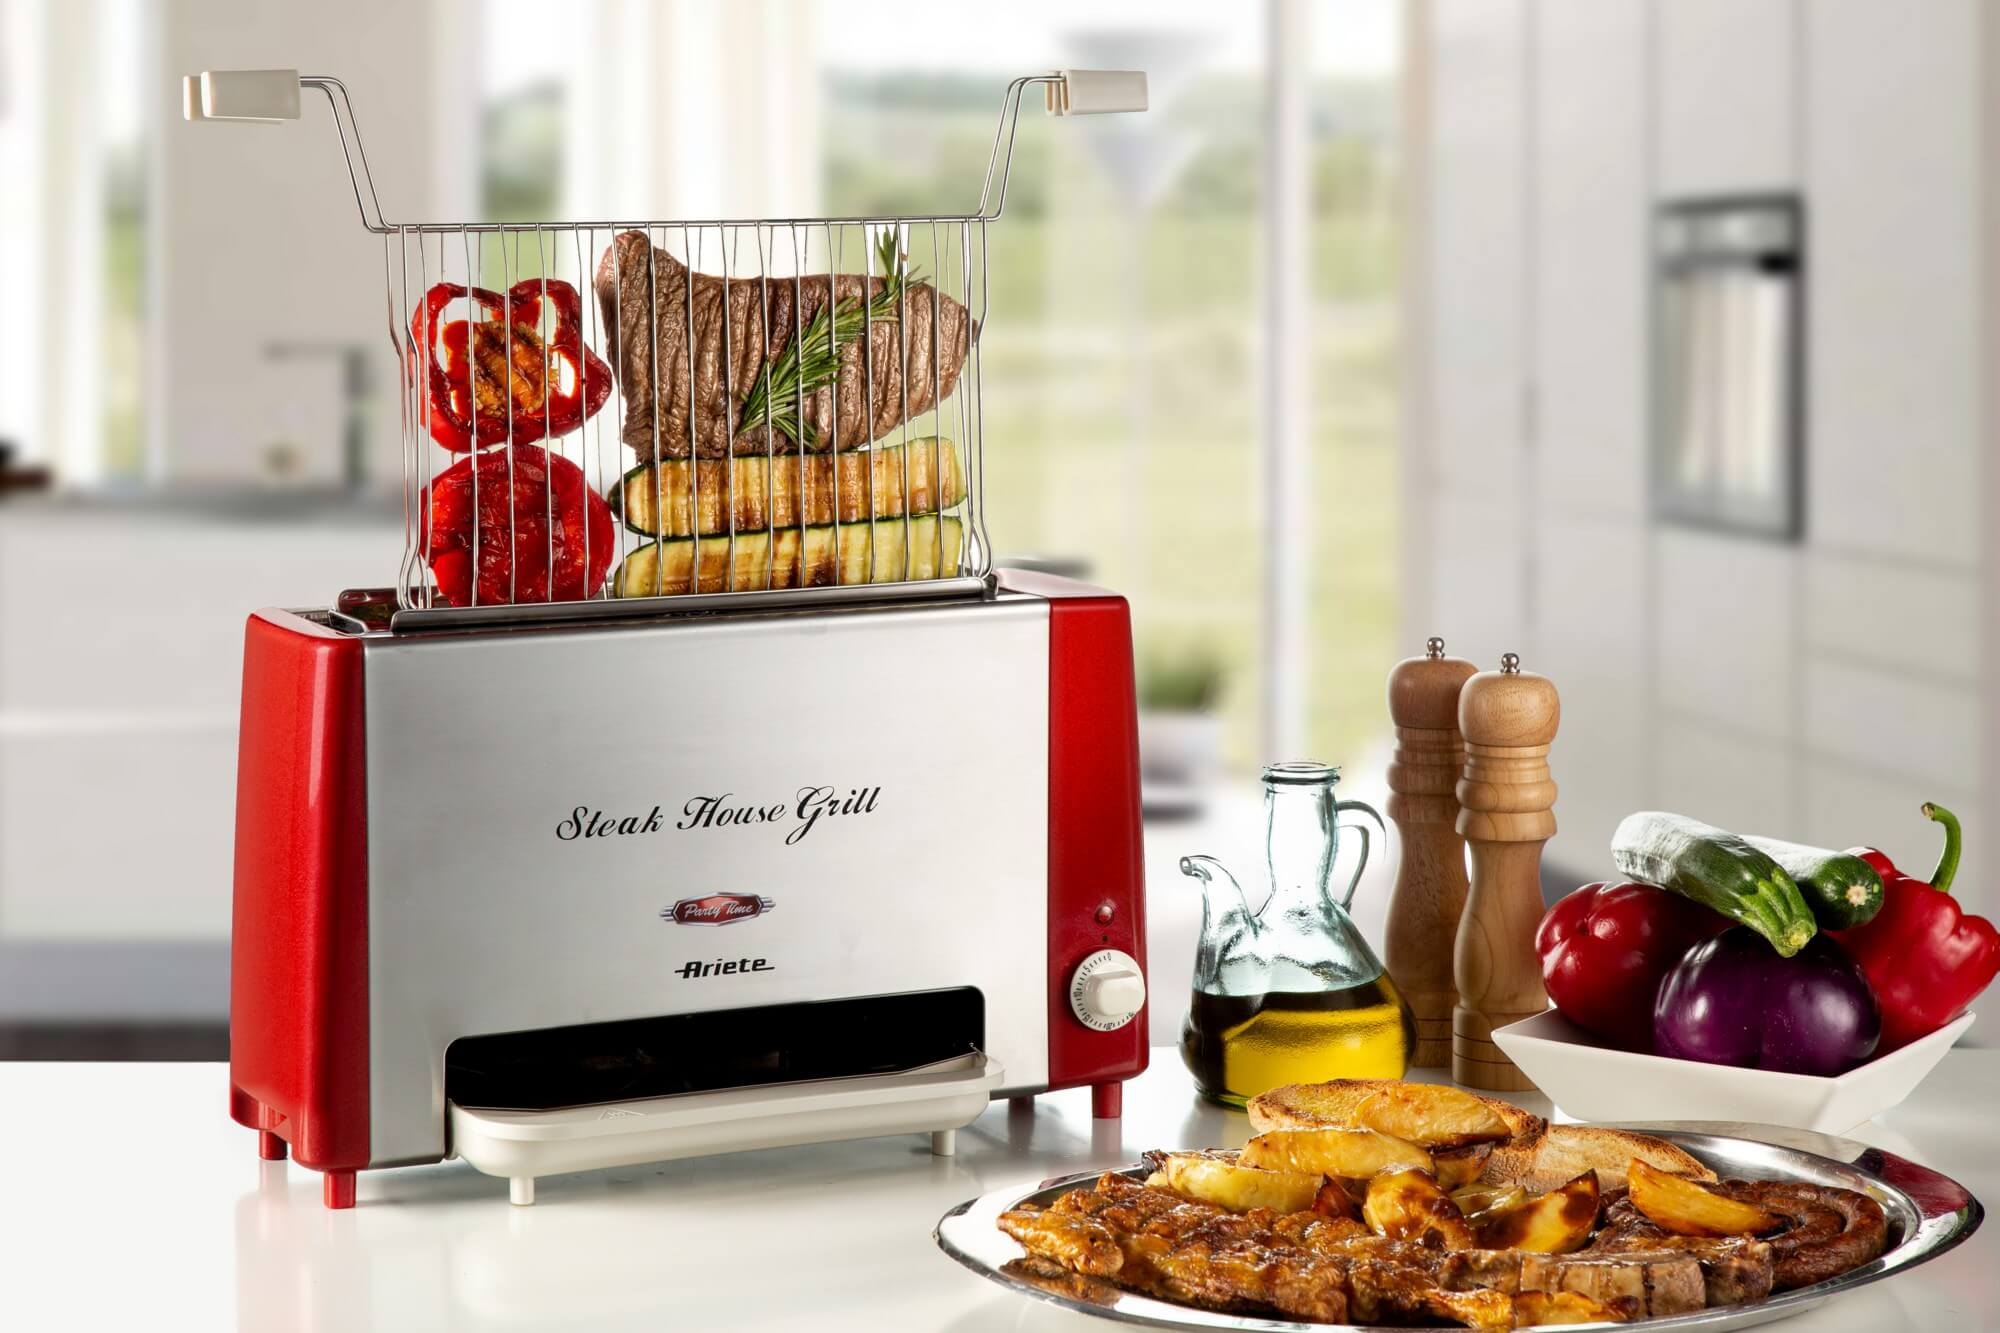 Vertical grill for meat, steaks, fish, vegetables